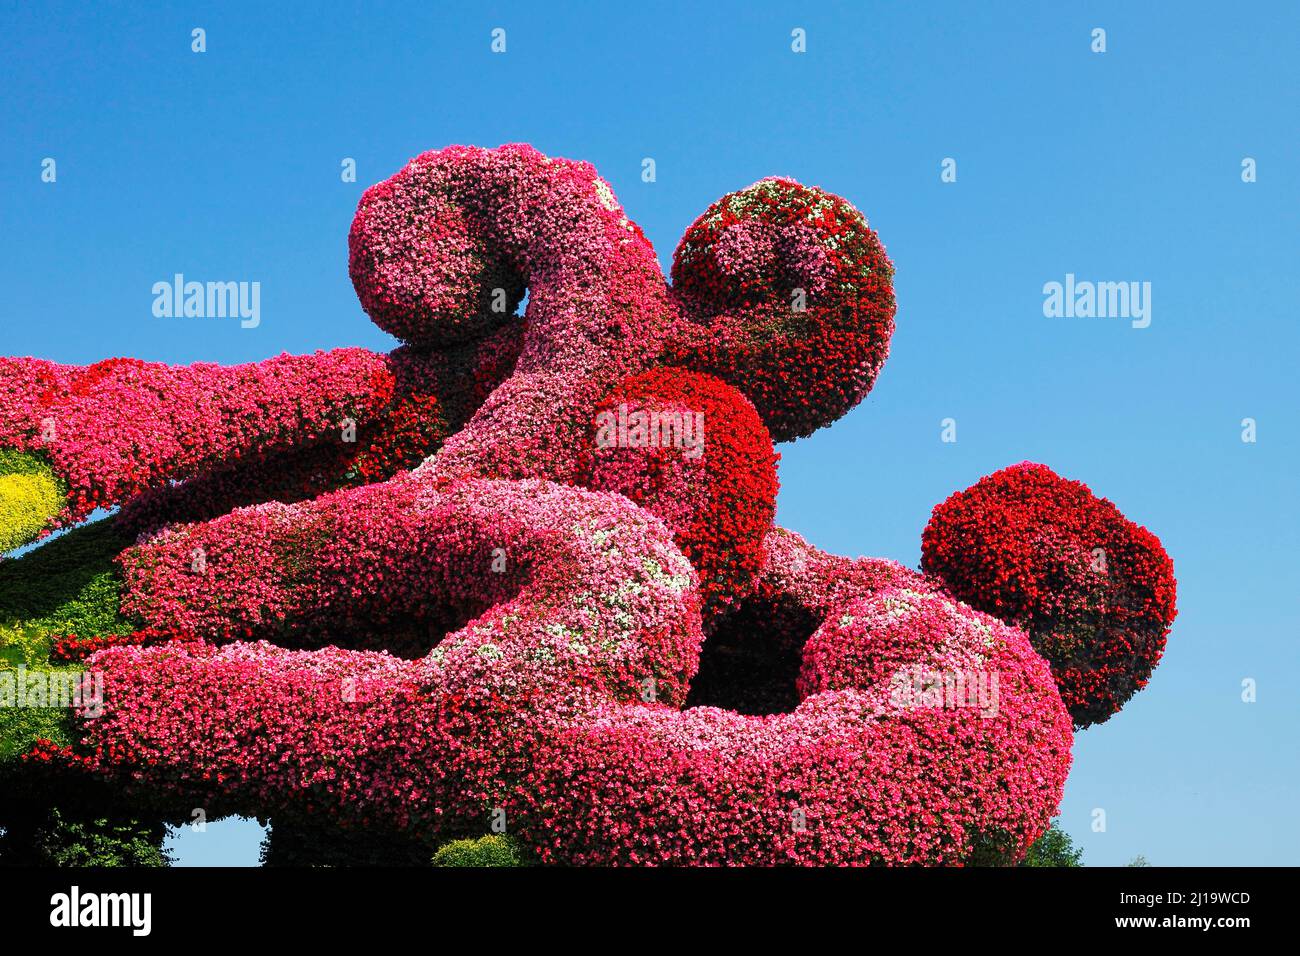 Plant sculpture, Horticulture, Botanical Garden, Montreal, Province of Quebec, Canada Stock Photo